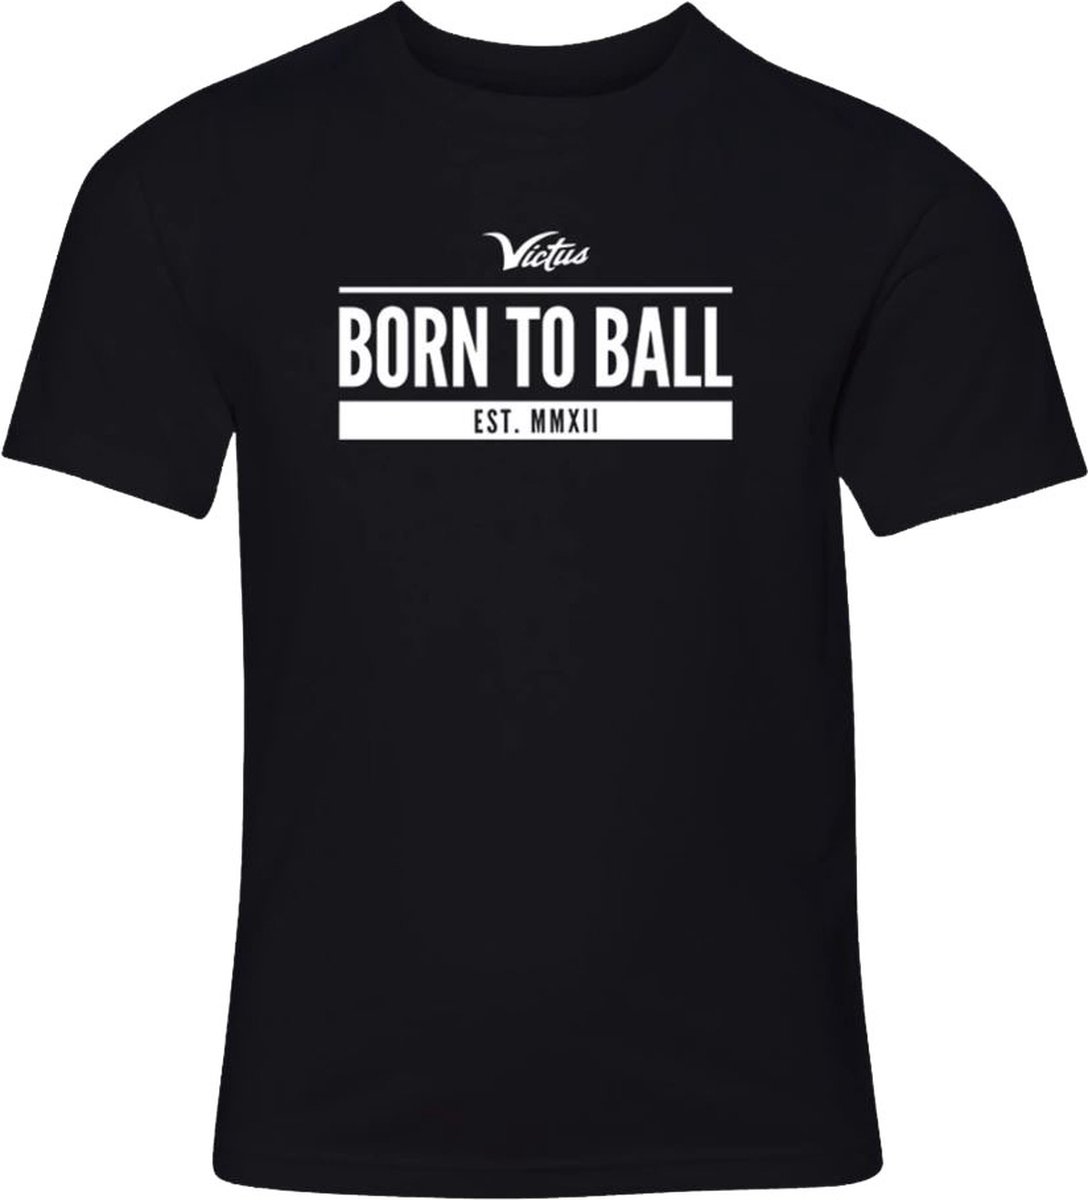 Victus Youth Born to Ball Short Sleeve Tee L Black